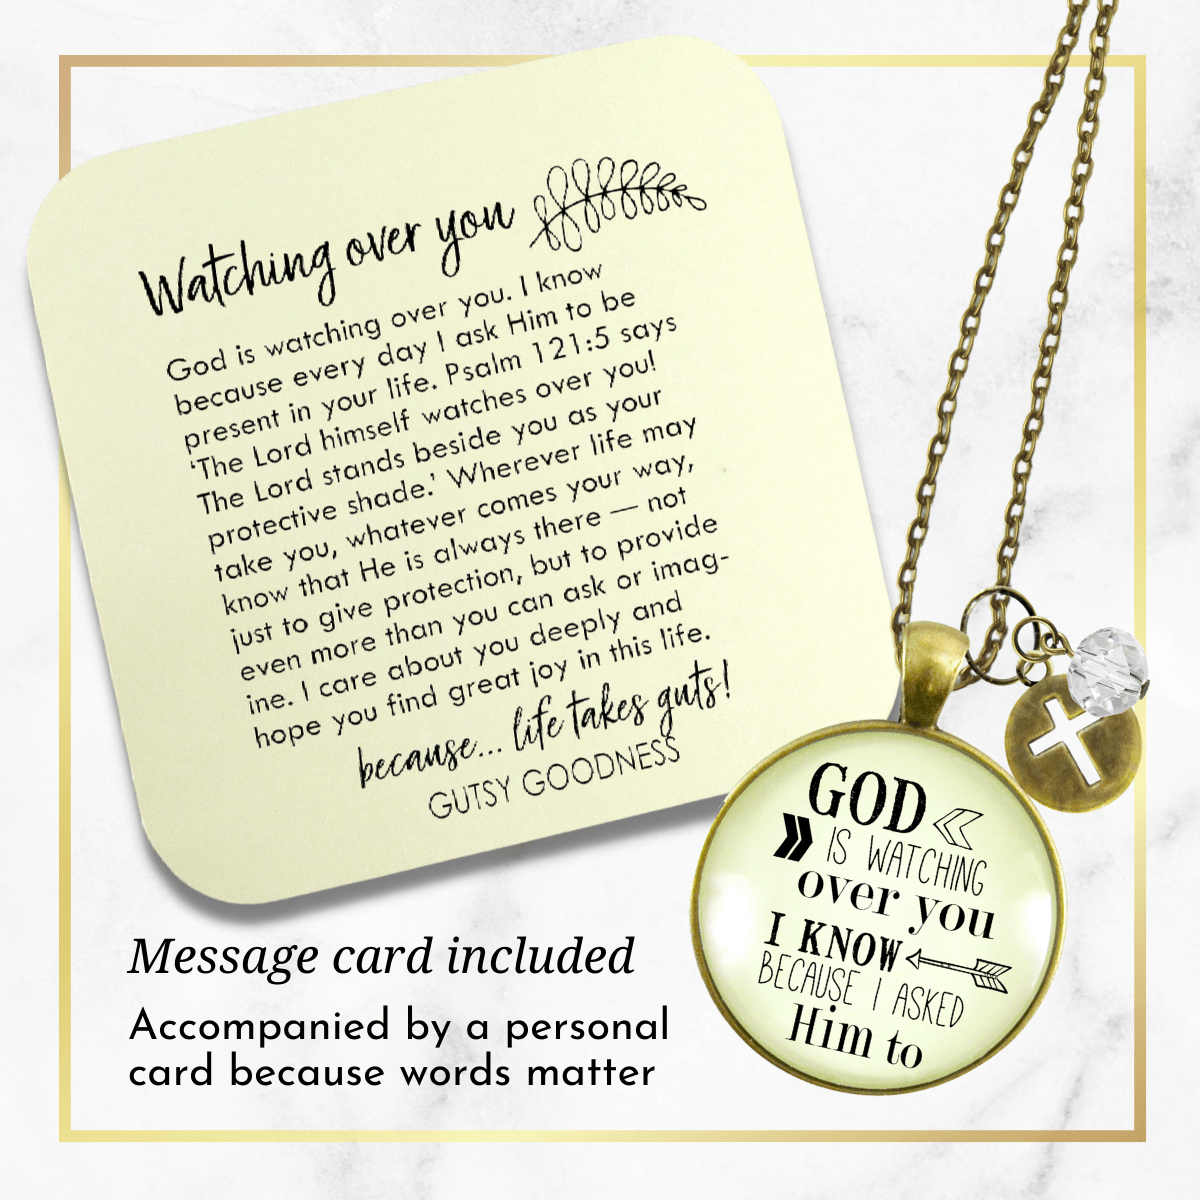 Gutsy Goodness Faith Necklace He is Watching Over You Vintage Charm Jewelry - Gutsy Goodness;Faith Necklace He Is Watching Over You Vintage Charm Jewelry - Gutsy Goodness Handmade Jewelry Gifts